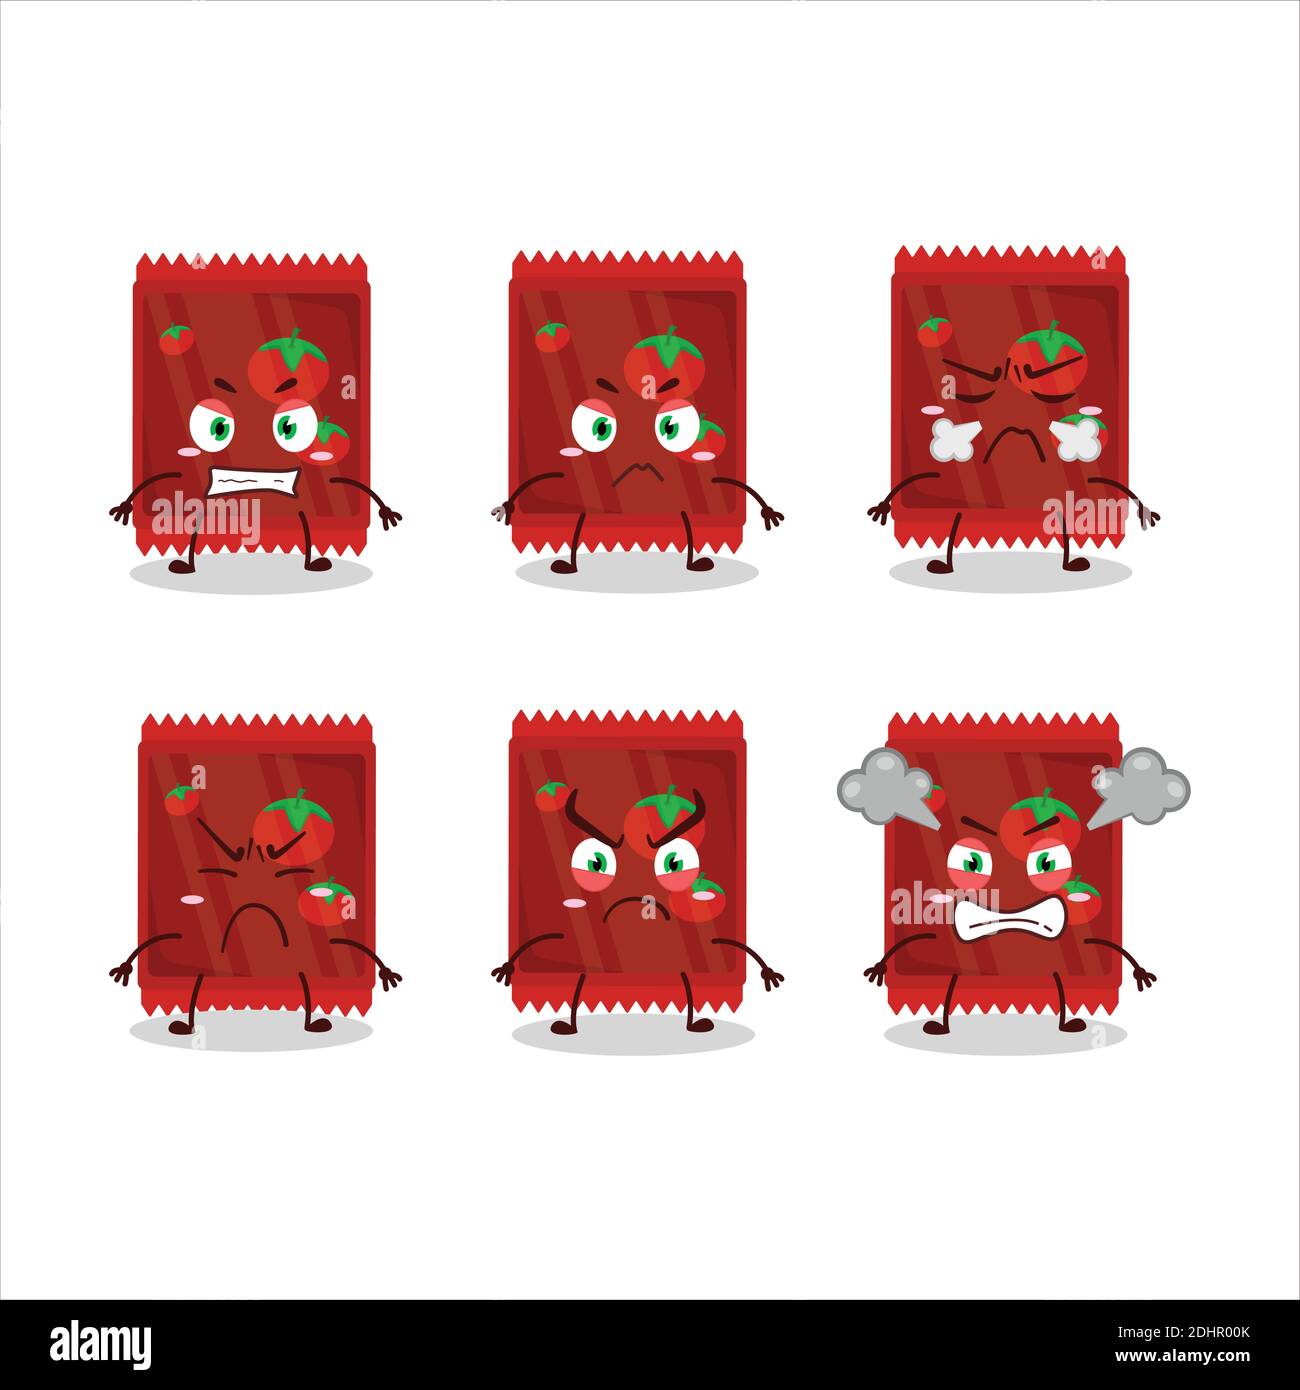 Ketchup sachet cartoon character with various angry expressions. Vector illustration Stock Vector